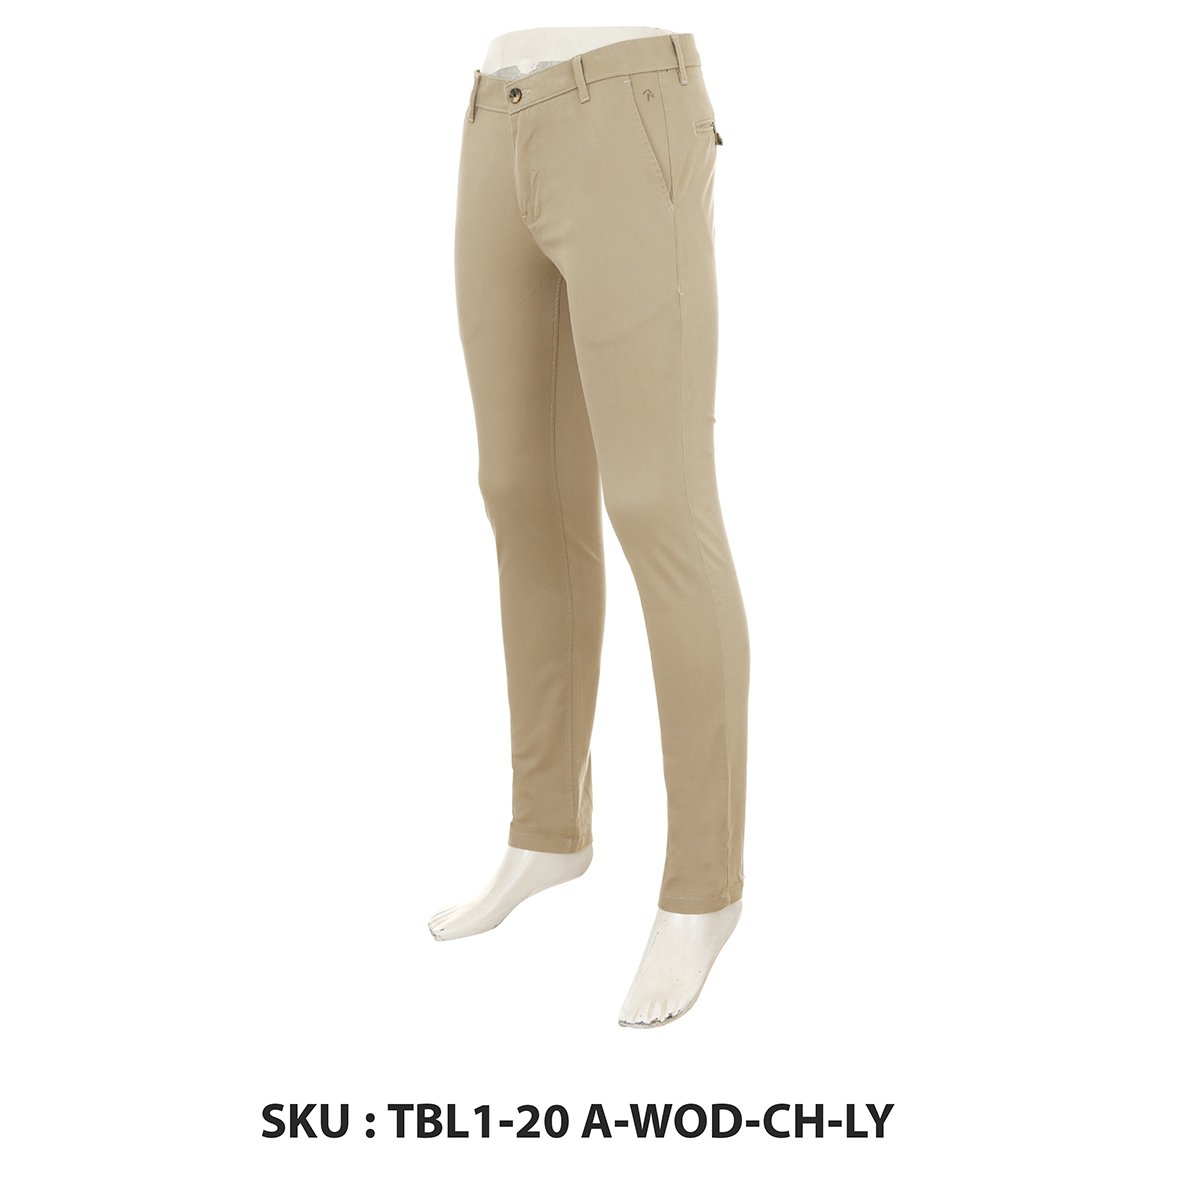 Classic Polo Mens Trousers Tbl1-20 A-Wod-Ch-Ly Wood 38